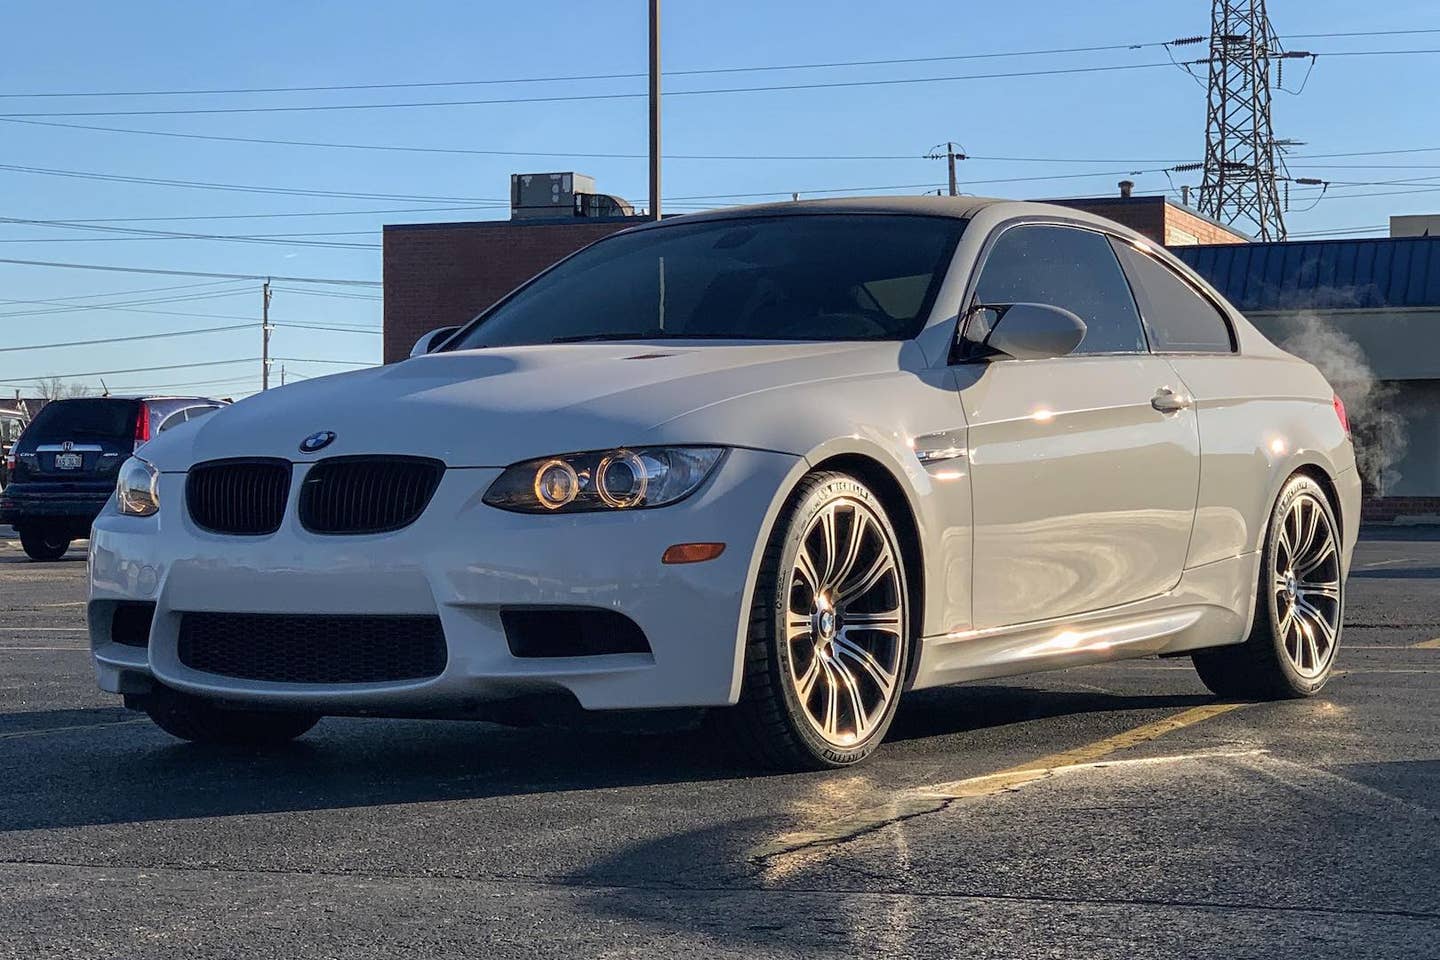 Jerry Moroko's supercharged 2008 BMW M3 in white